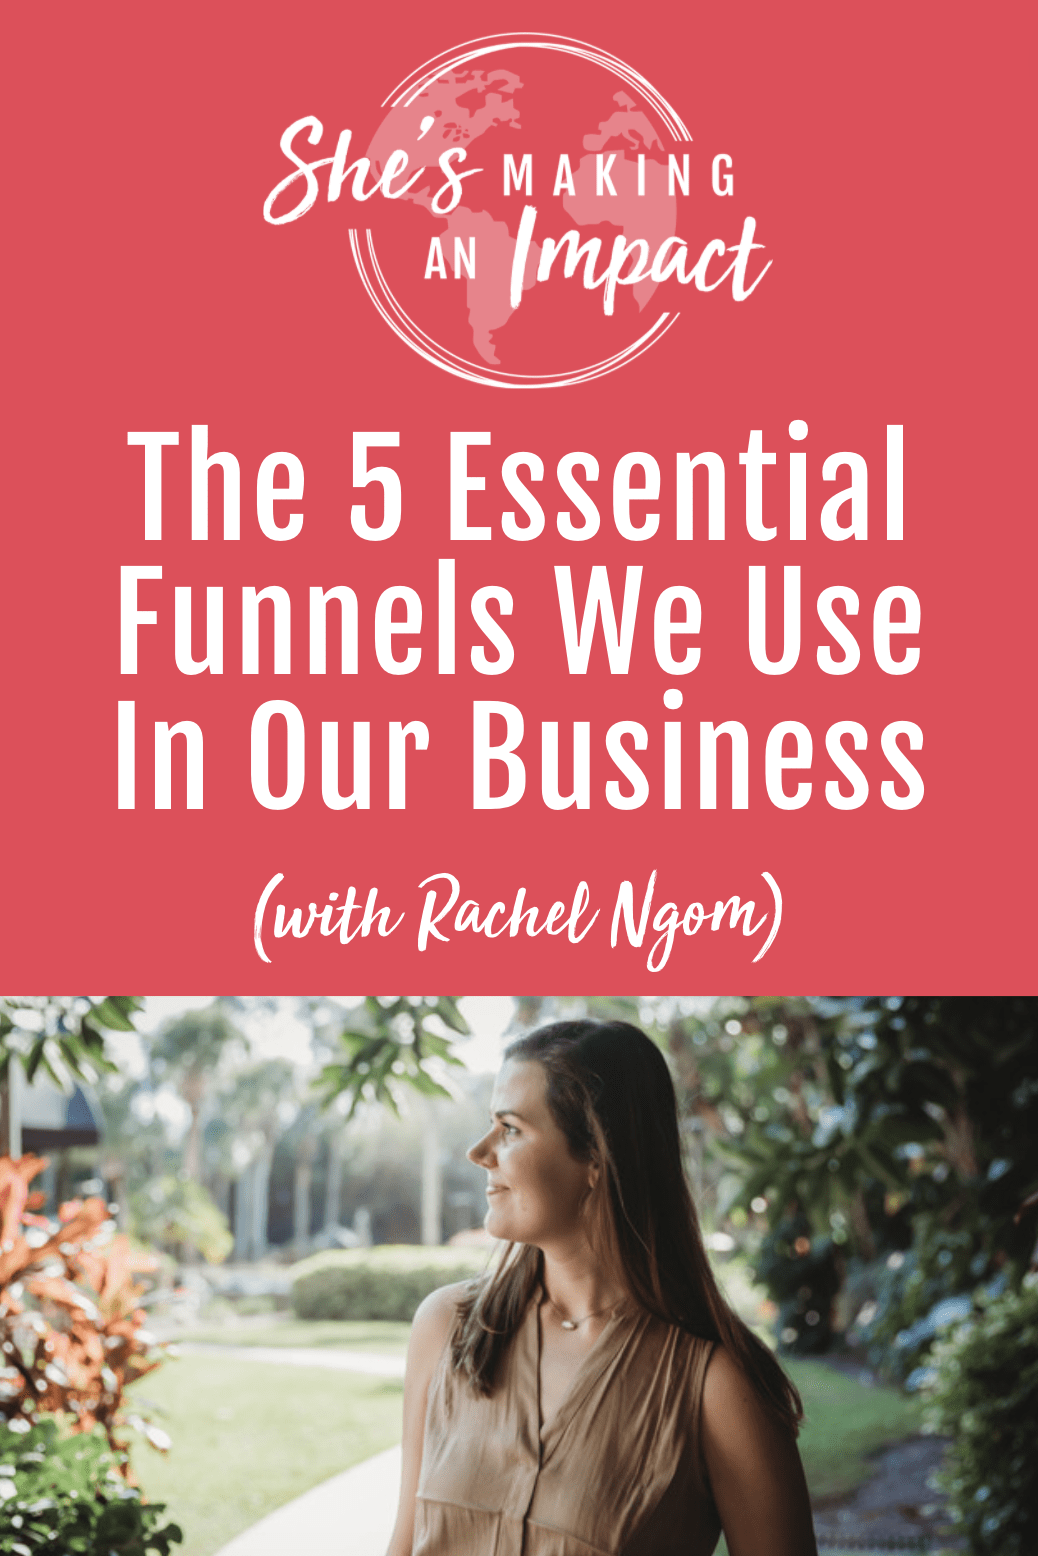 The 5 Essential Funnels We Use In Our Business: Episode 318